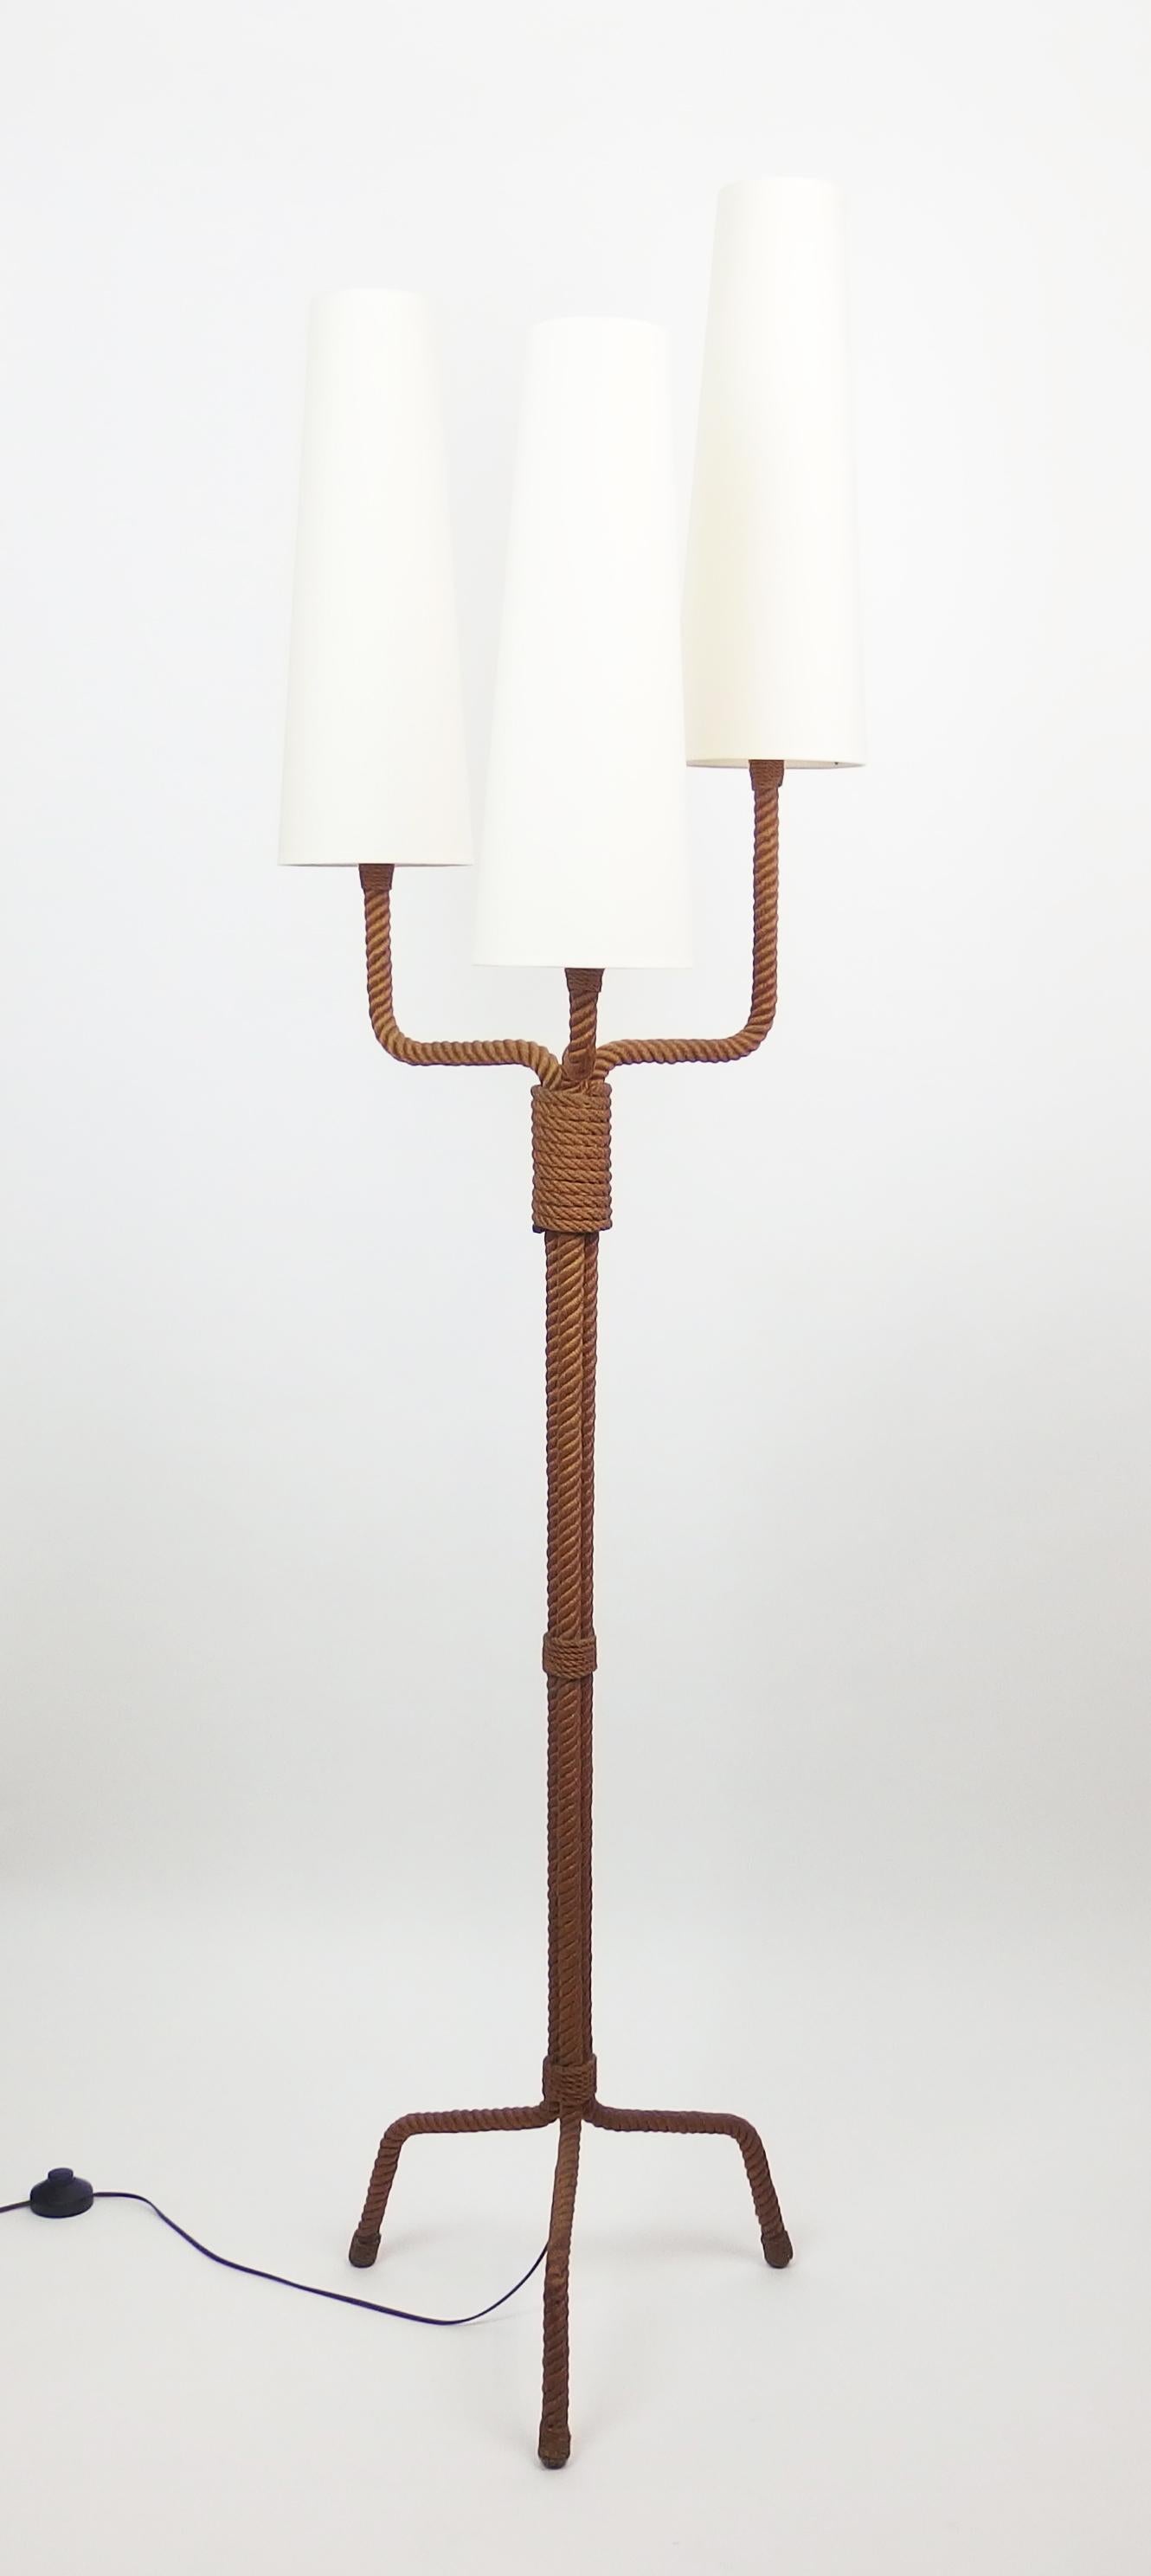 A three arms, tobacco color stained, rope floor lamp by Audoux Minet. New shades. American sockets.
Measures: Higher arm with shade 70.80 in
Lower arm with shade 65 in.